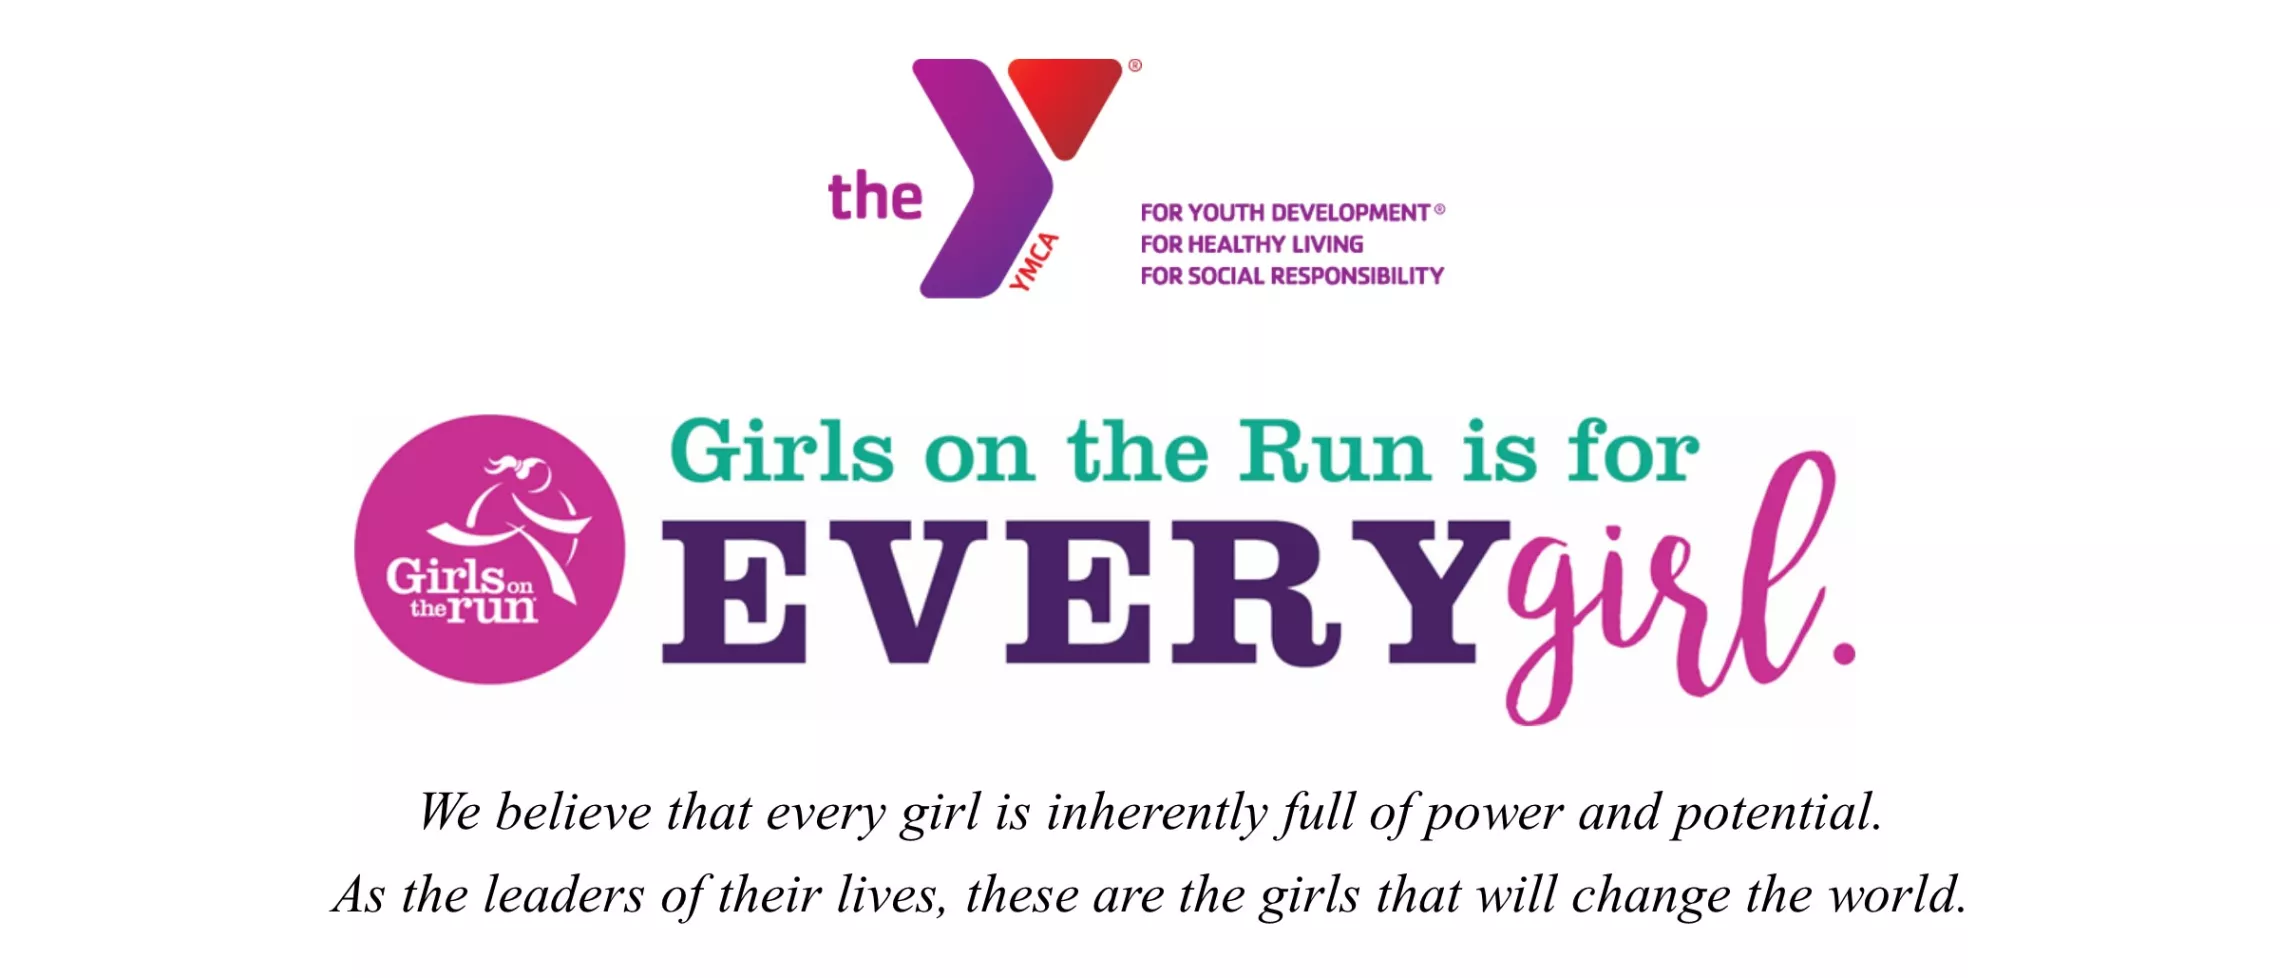 Girls On The Run at the Plano Family YMCA